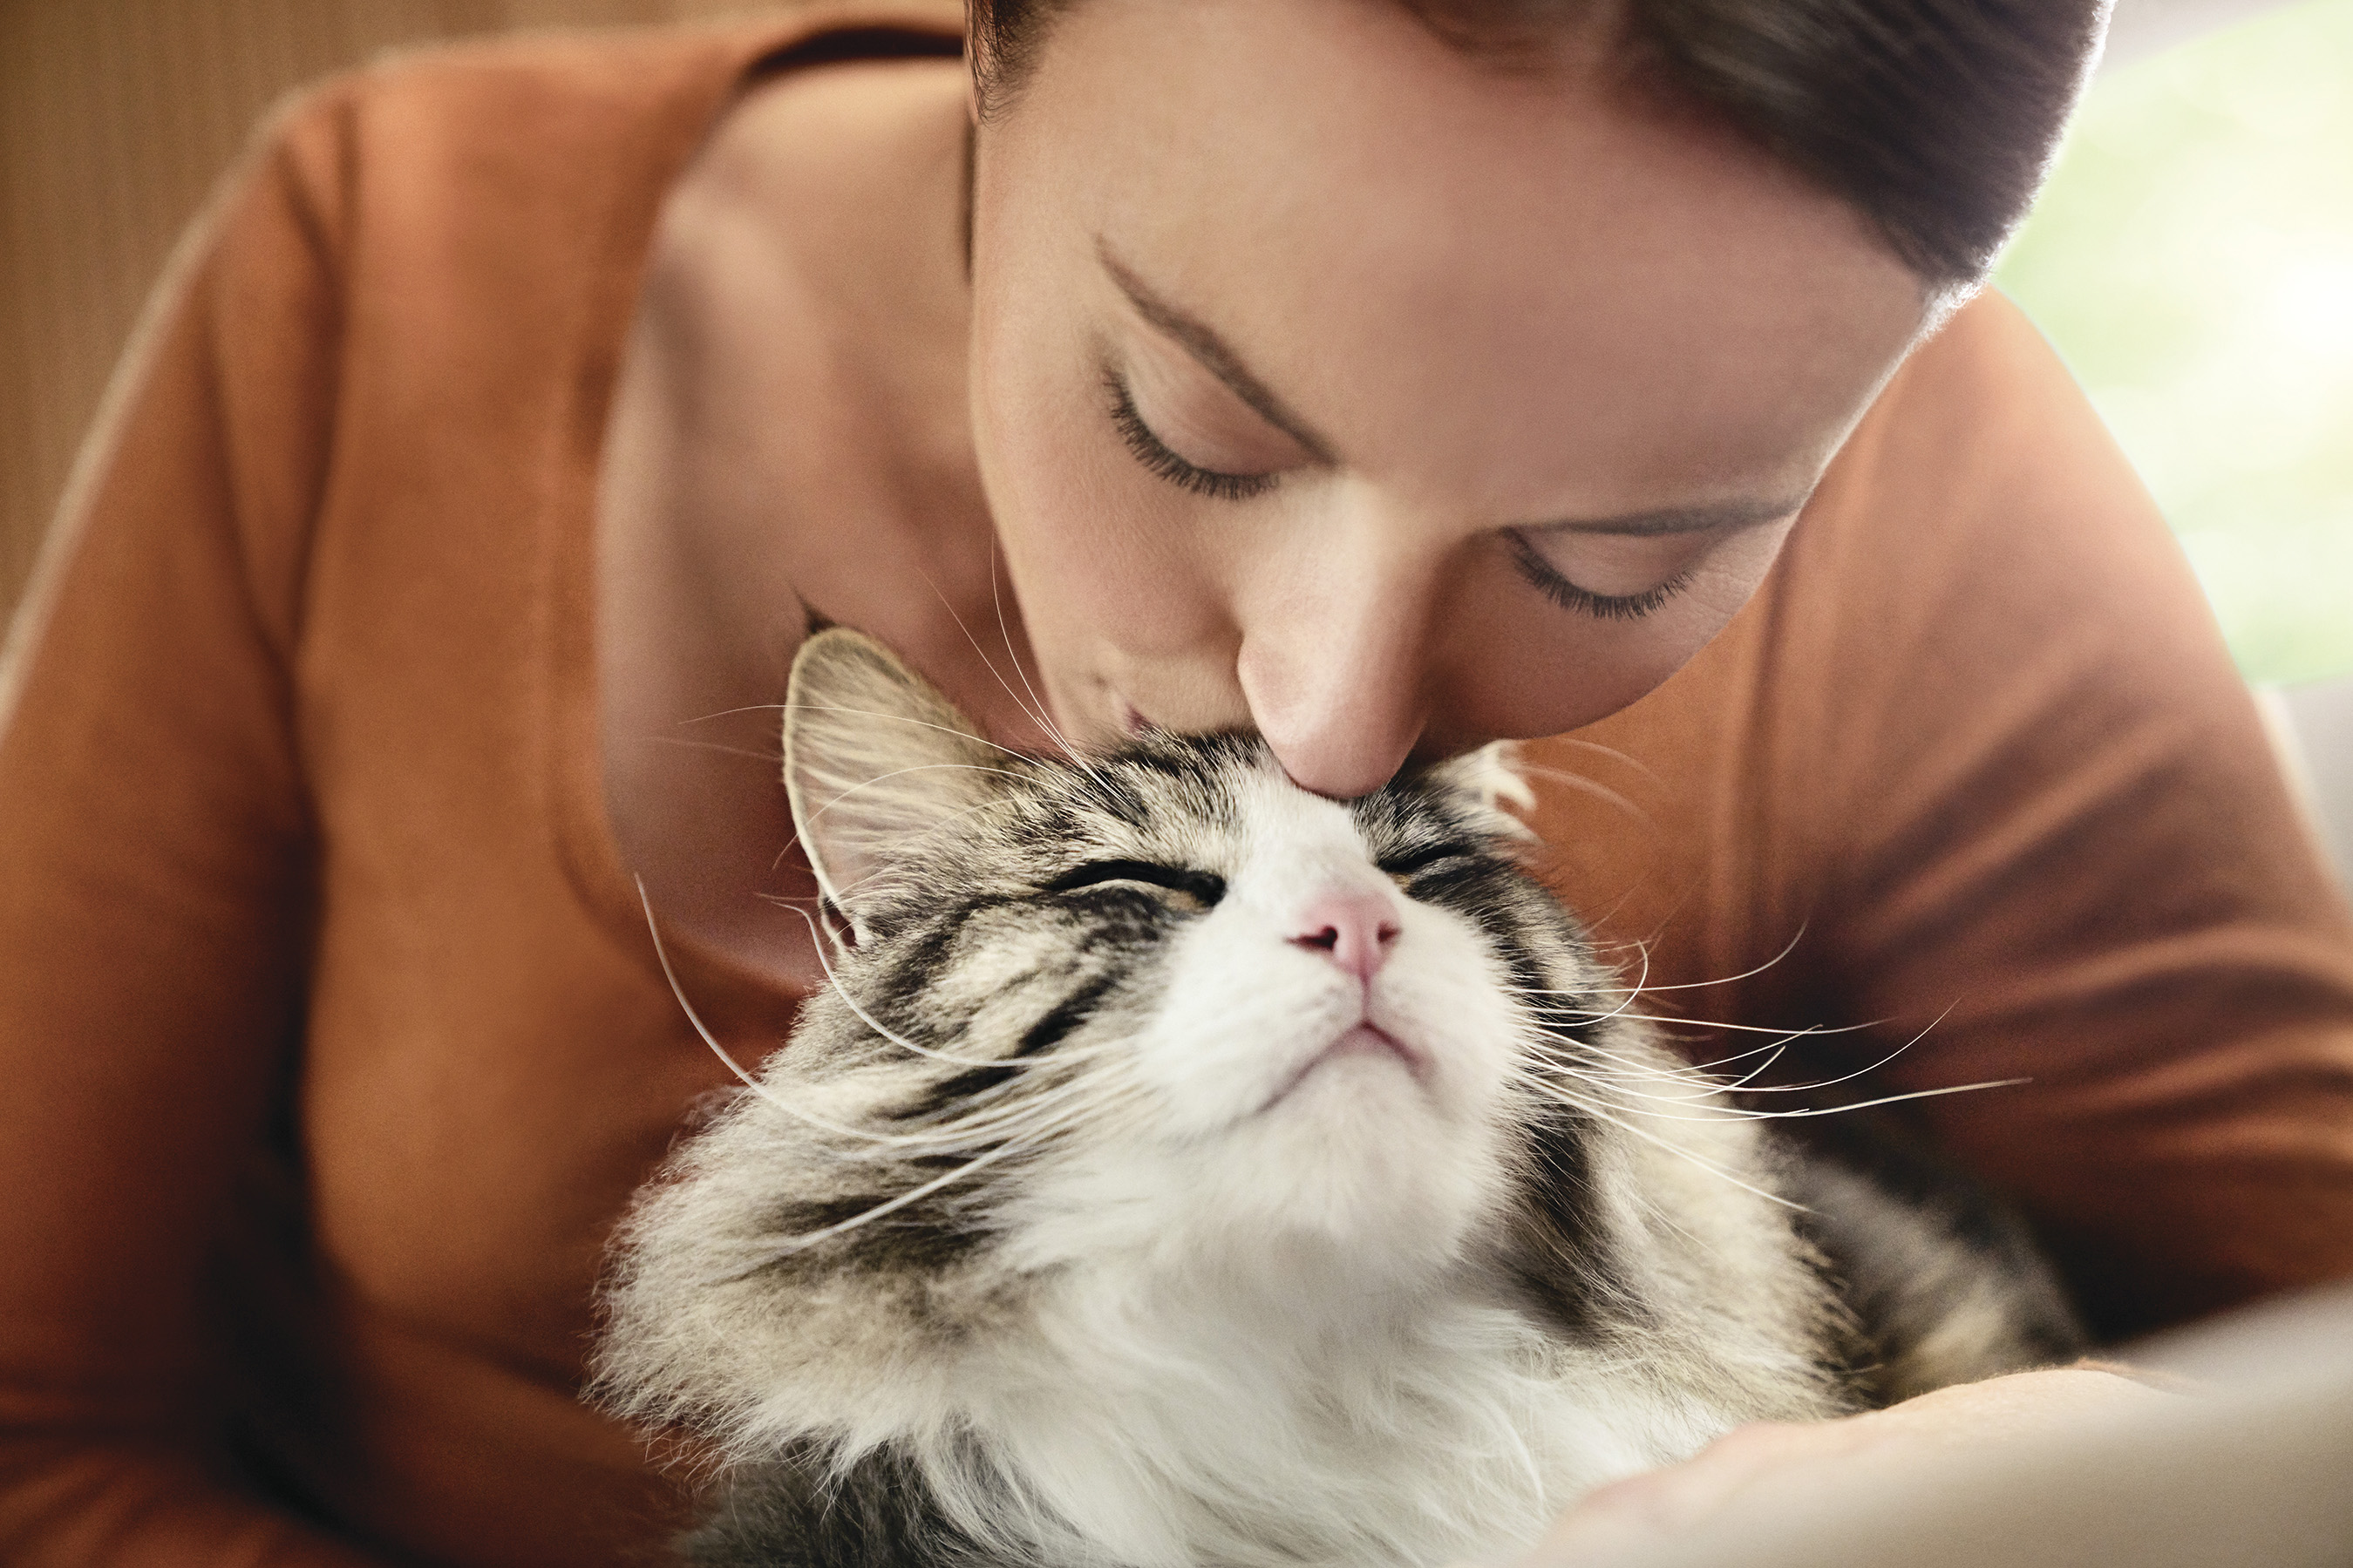 The bond that owners share with their cats is strong – a universal truth for all cat owners regardless of cat allergen sensitivities. A new survey from Purina Pro Plan in partnership with the Human Animal Bond Research Institute (HABRI), revealed that 84 percent of cat owners would dismiss the advice of a doctor if told to give up their cat to help manage cat allergens.